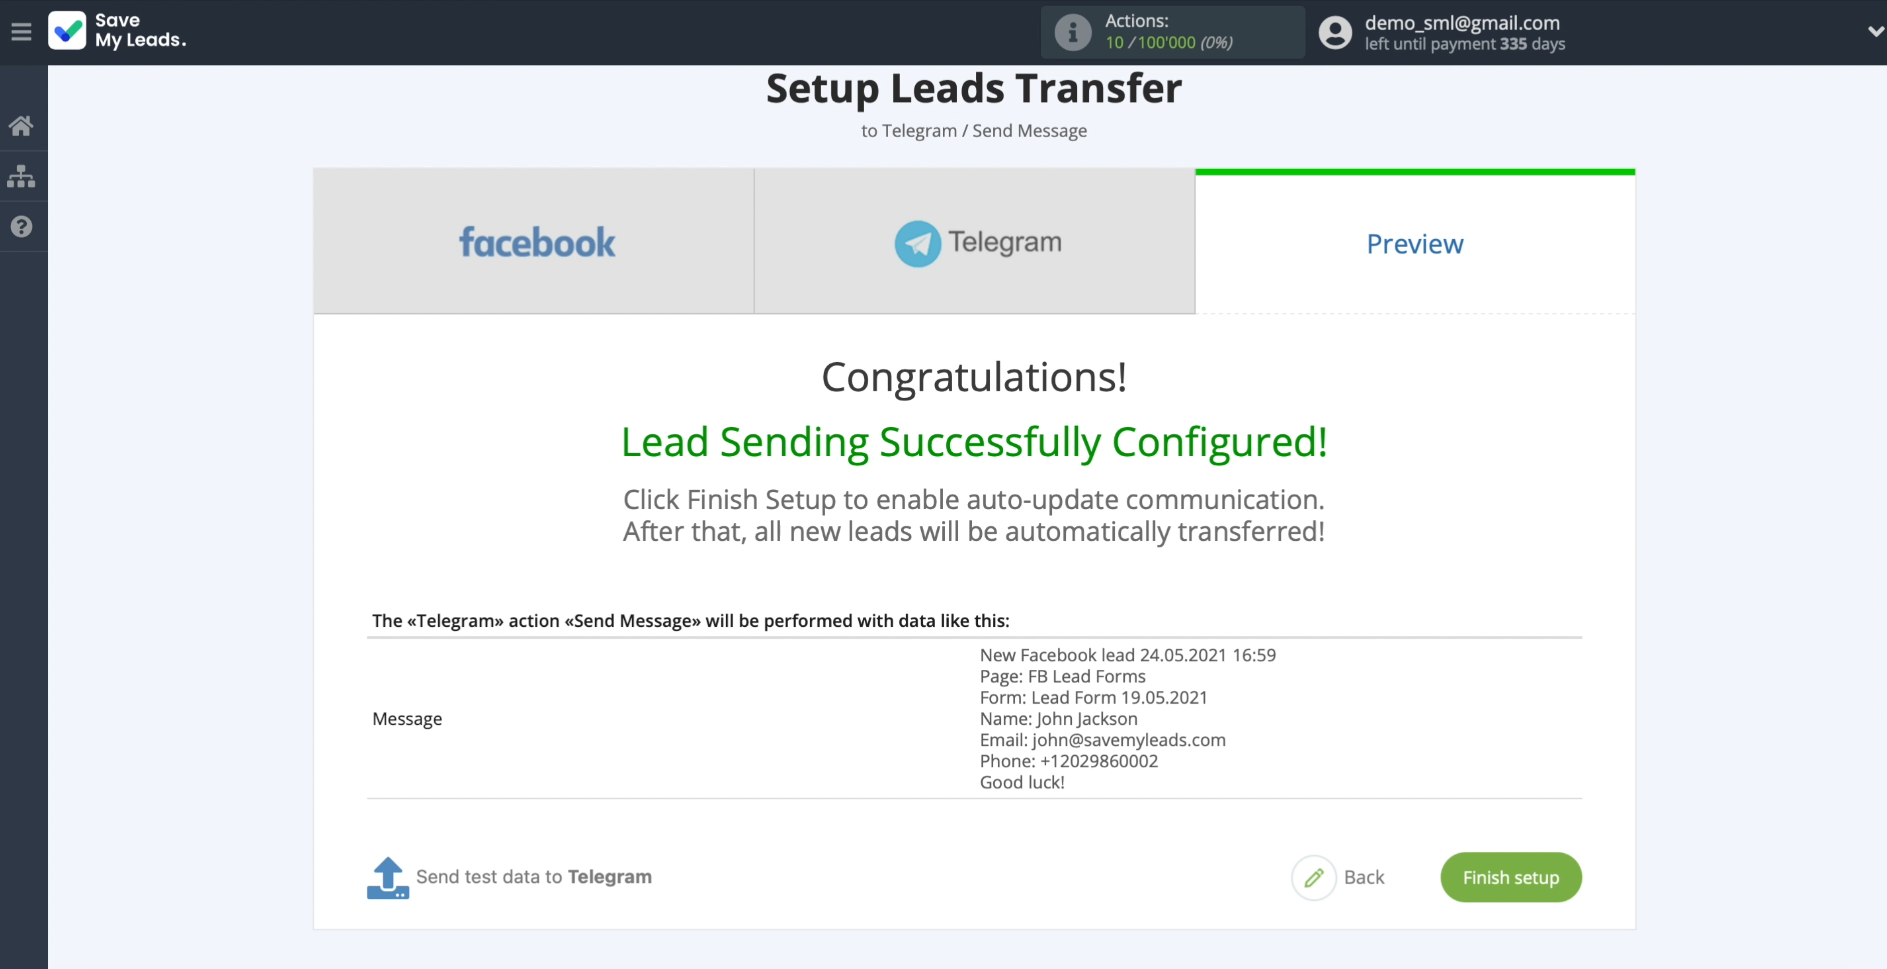 How to set up the upload of new leads from a Facebook advertising account in Telegram | Checking the uploaded data